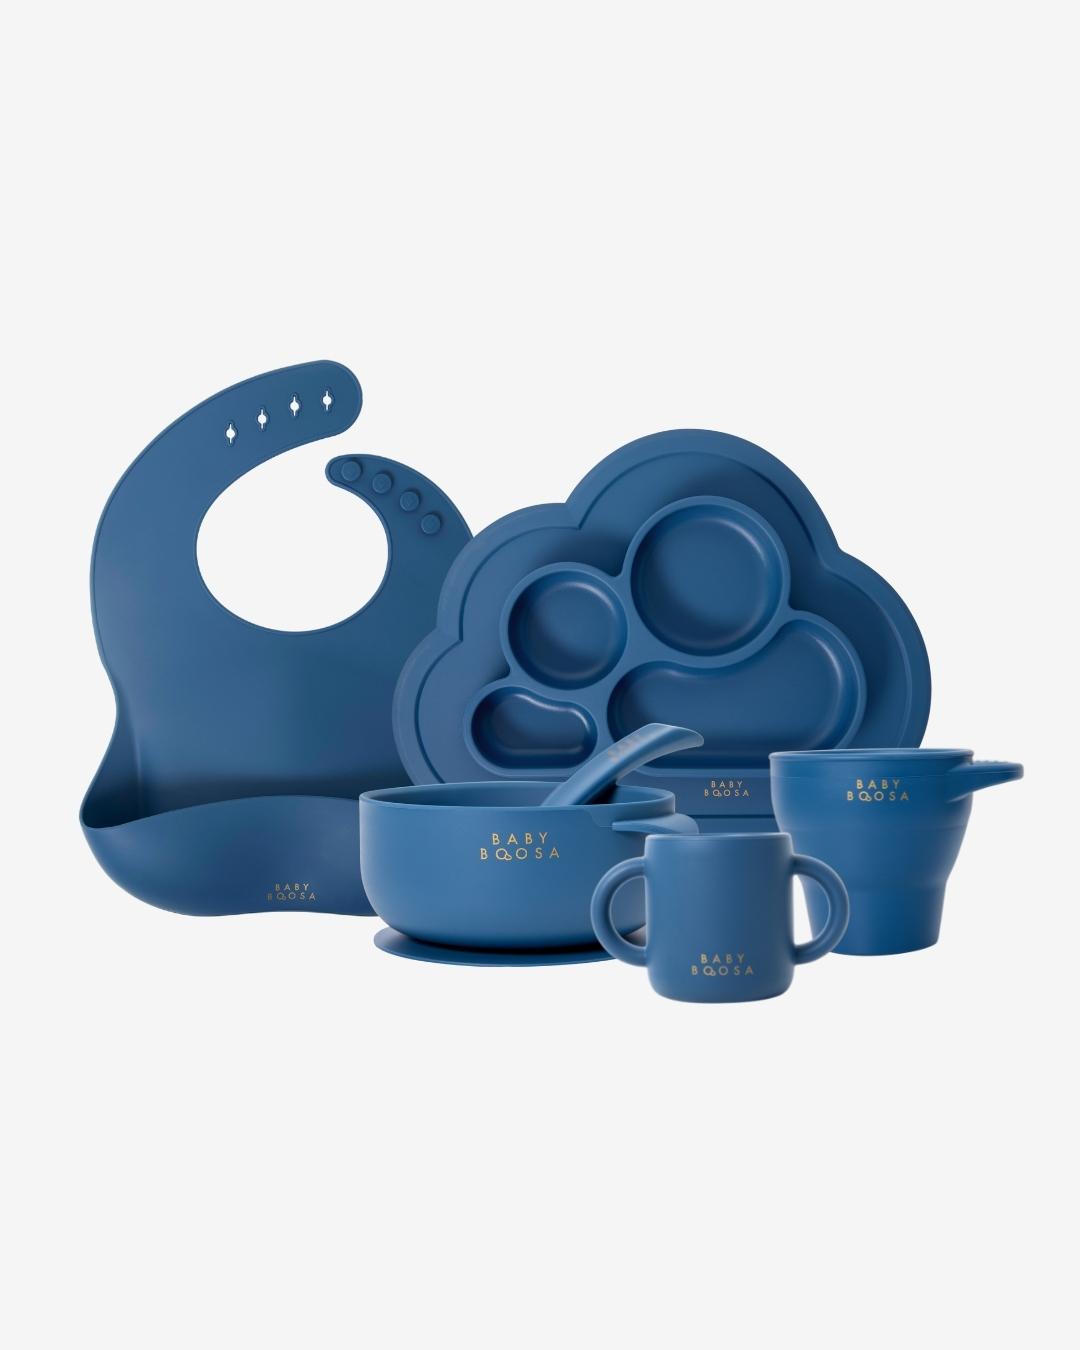 Weaning Gift Set | Luxe Silicone | All you need Essentials | Mess-Free | Grippy non-slip suction | Easy Clean | Dentist Developed (Riviera Blue) - £80 Value